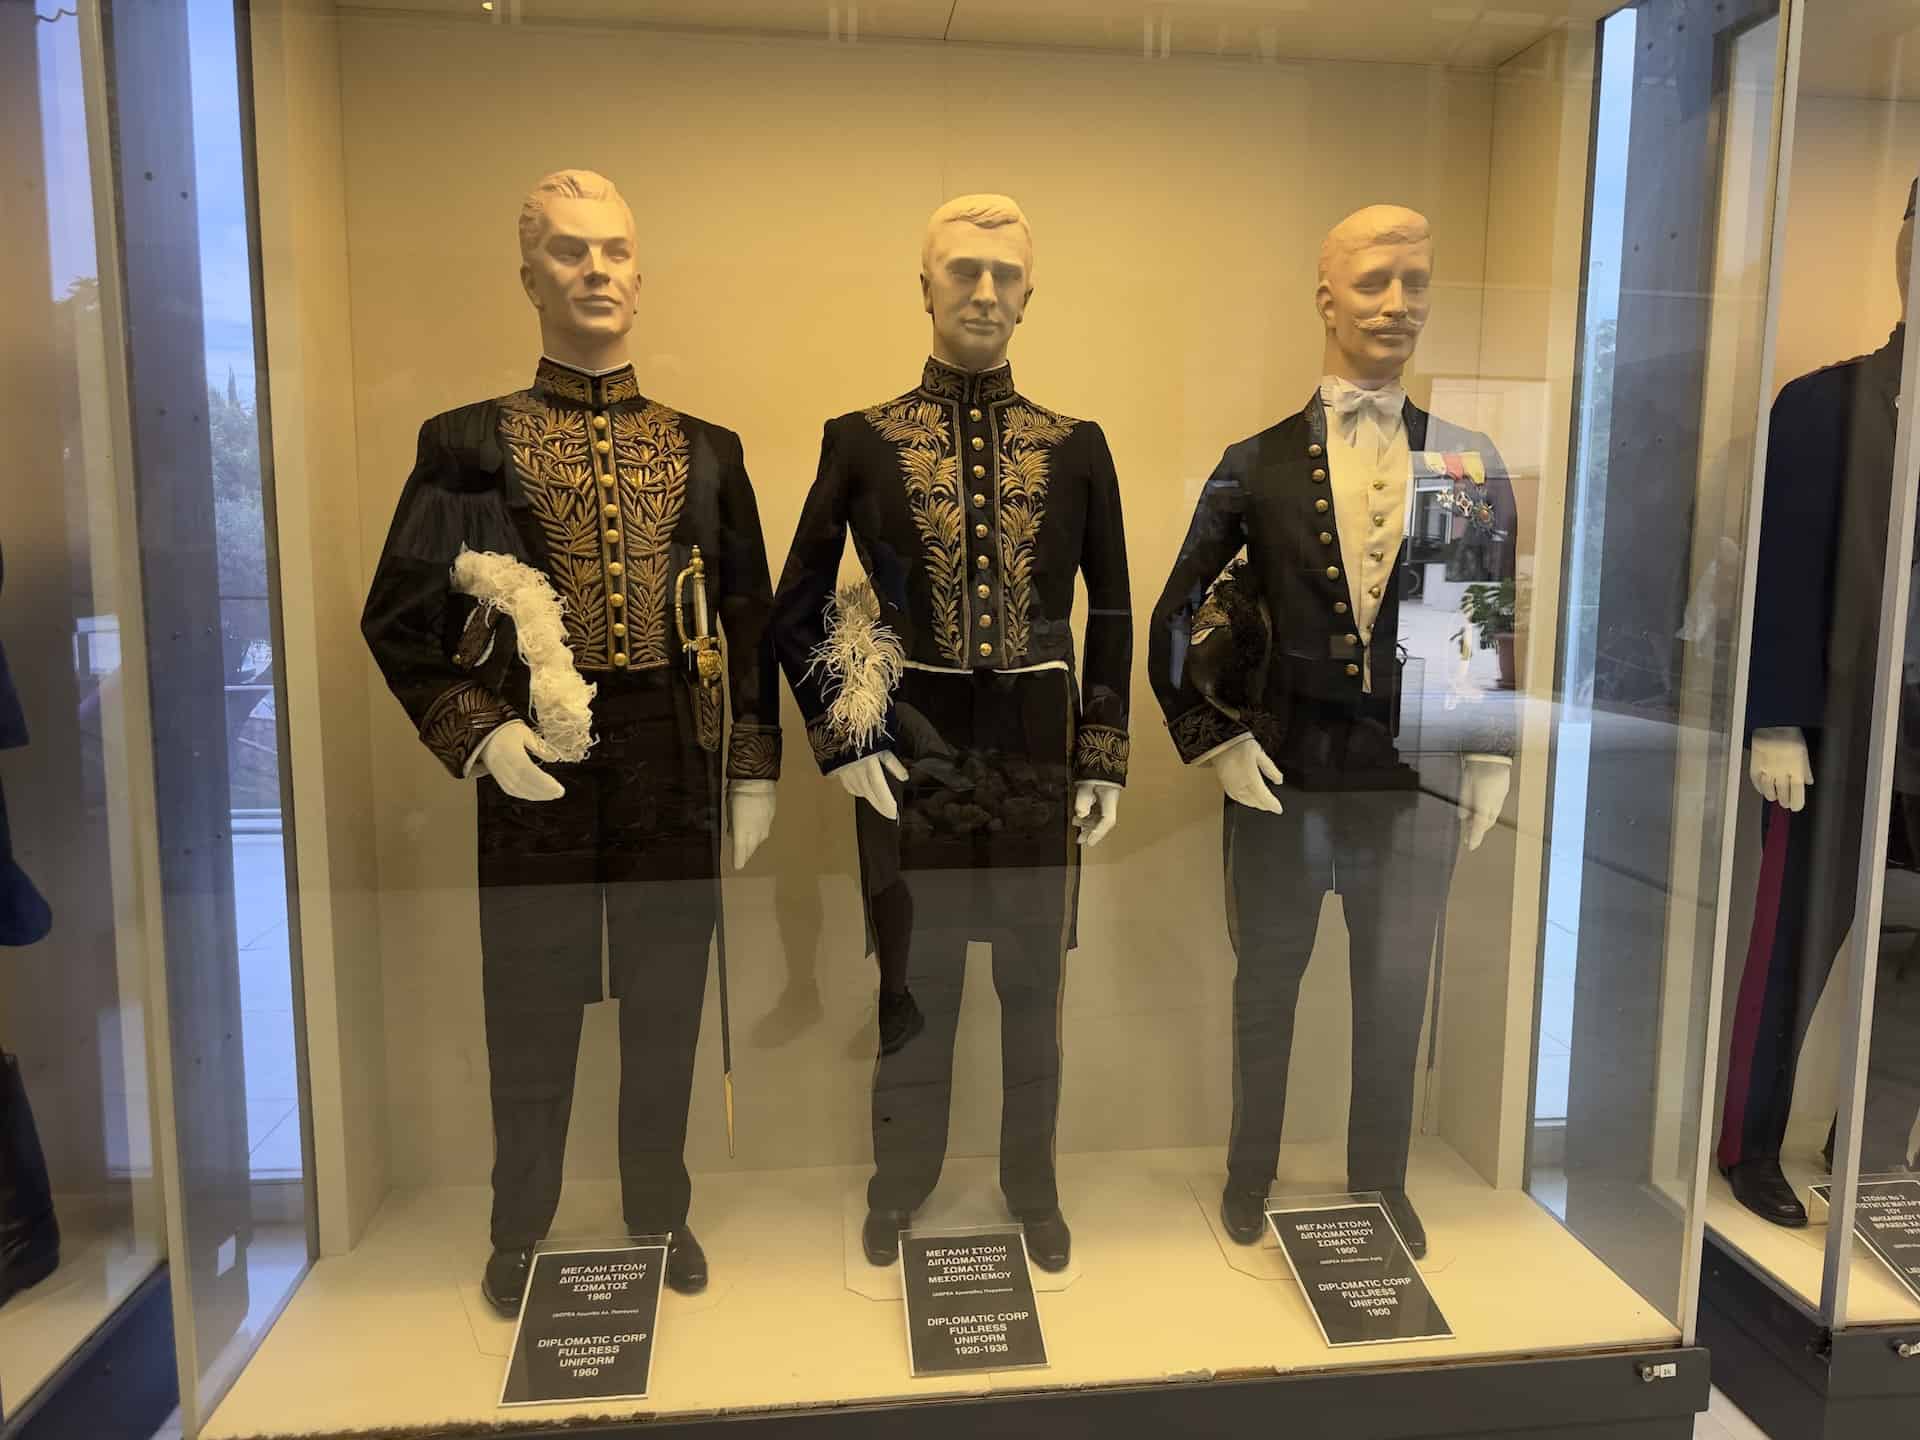 Diplomatic corps full dress uniform, 1960 (left); Diplomatic corps full dress uniform, 1920-1936 (center); Diplomatic corps full dress uniform, 1900 (right) at the War Museum in Athens, Greece